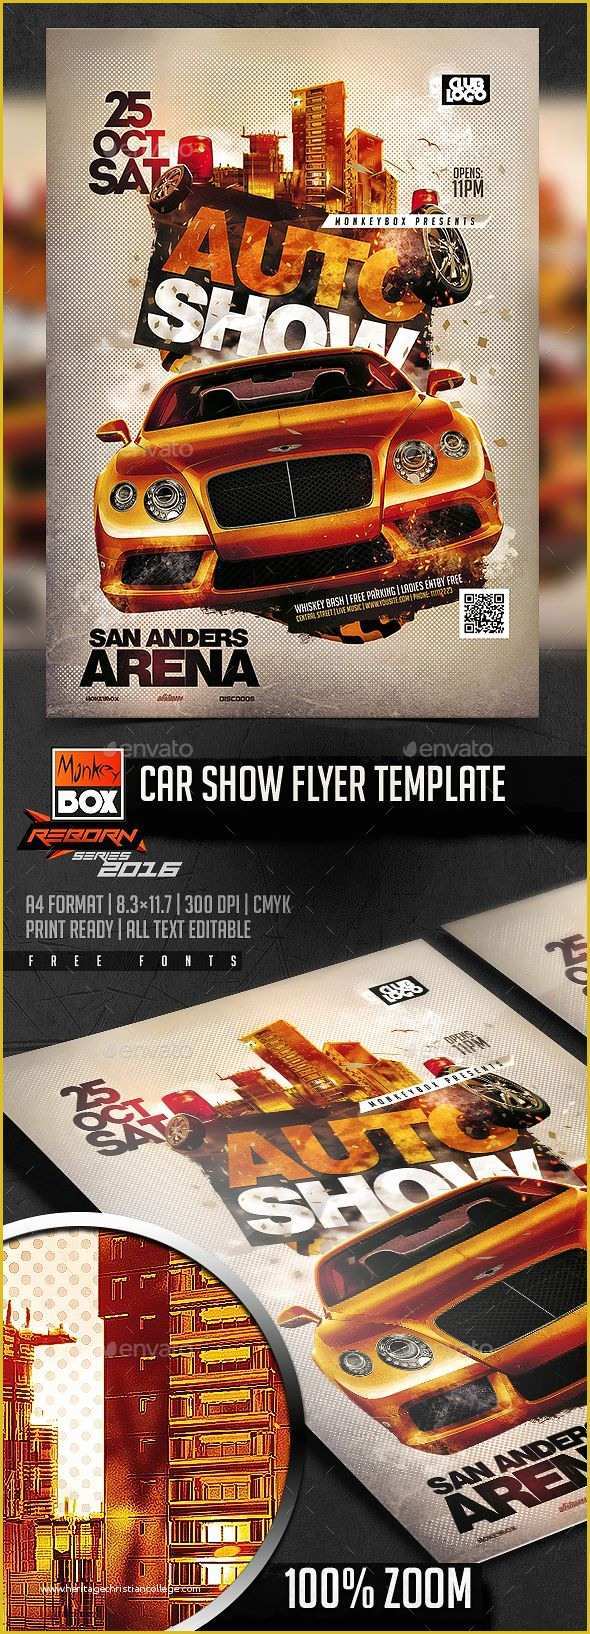 Free Car Show Flyer Template Of Car Show Flyer Template